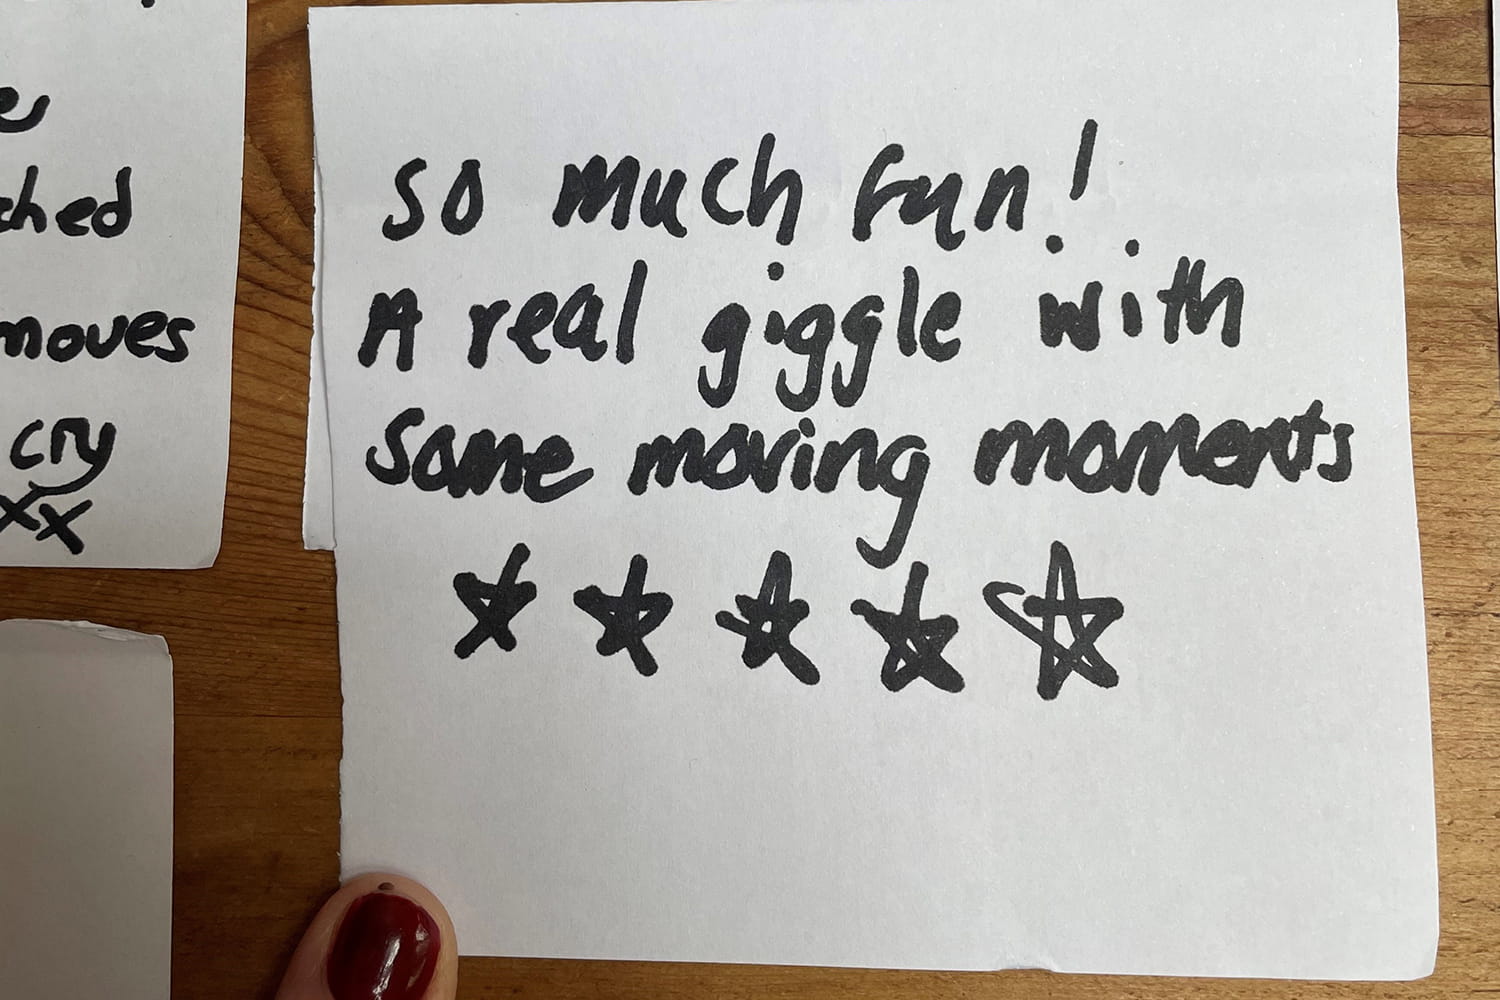 A handwritten feedback card for Nasty: "So much fun! a real giggle with some moving moments *****"